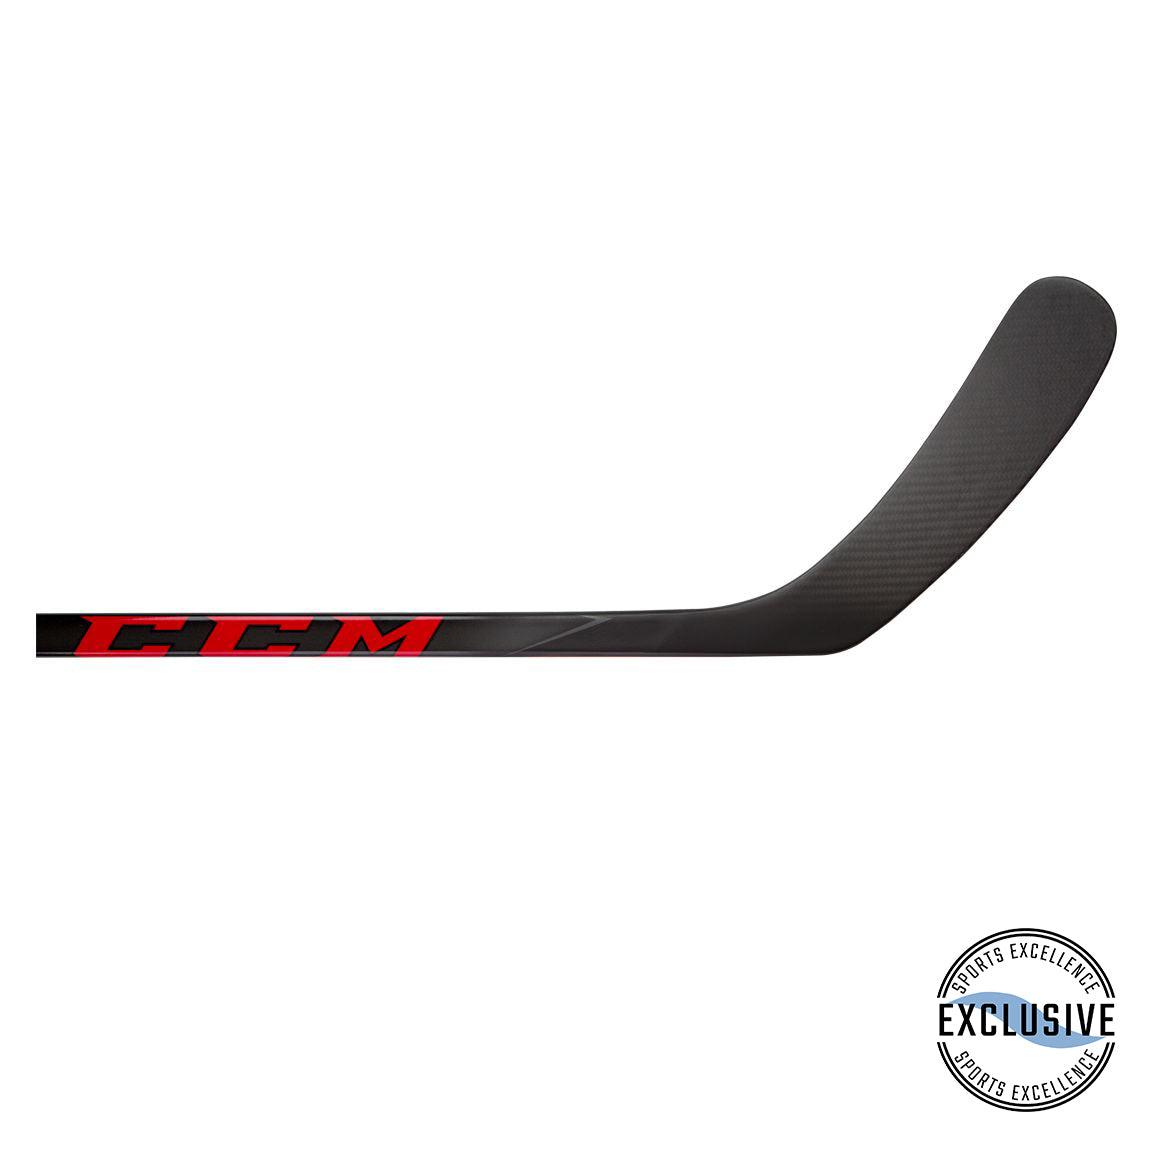 Ribcor Youth Composite Hockey Stick - Youth